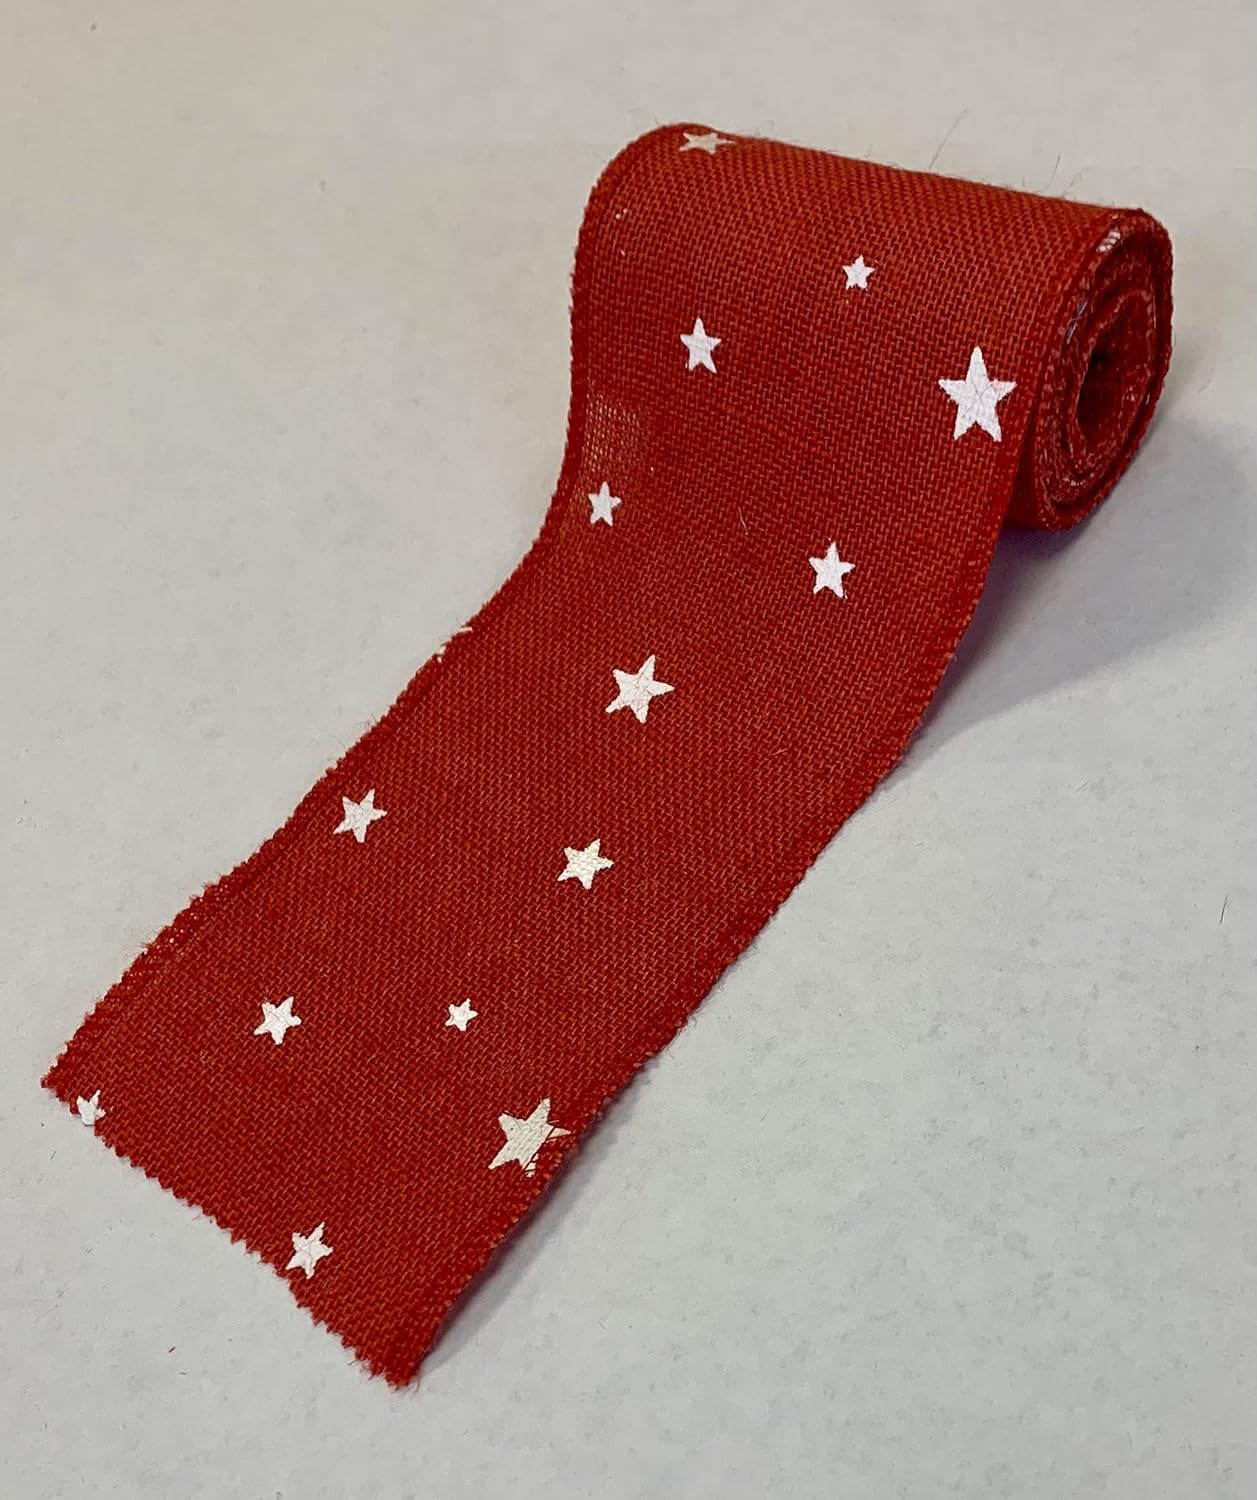 AAYU- 5 Inch X 15 Feet Red Burlap Ribbon Star Printed, Natural And Eco Friendly Product (Red Star, 5 Inch)